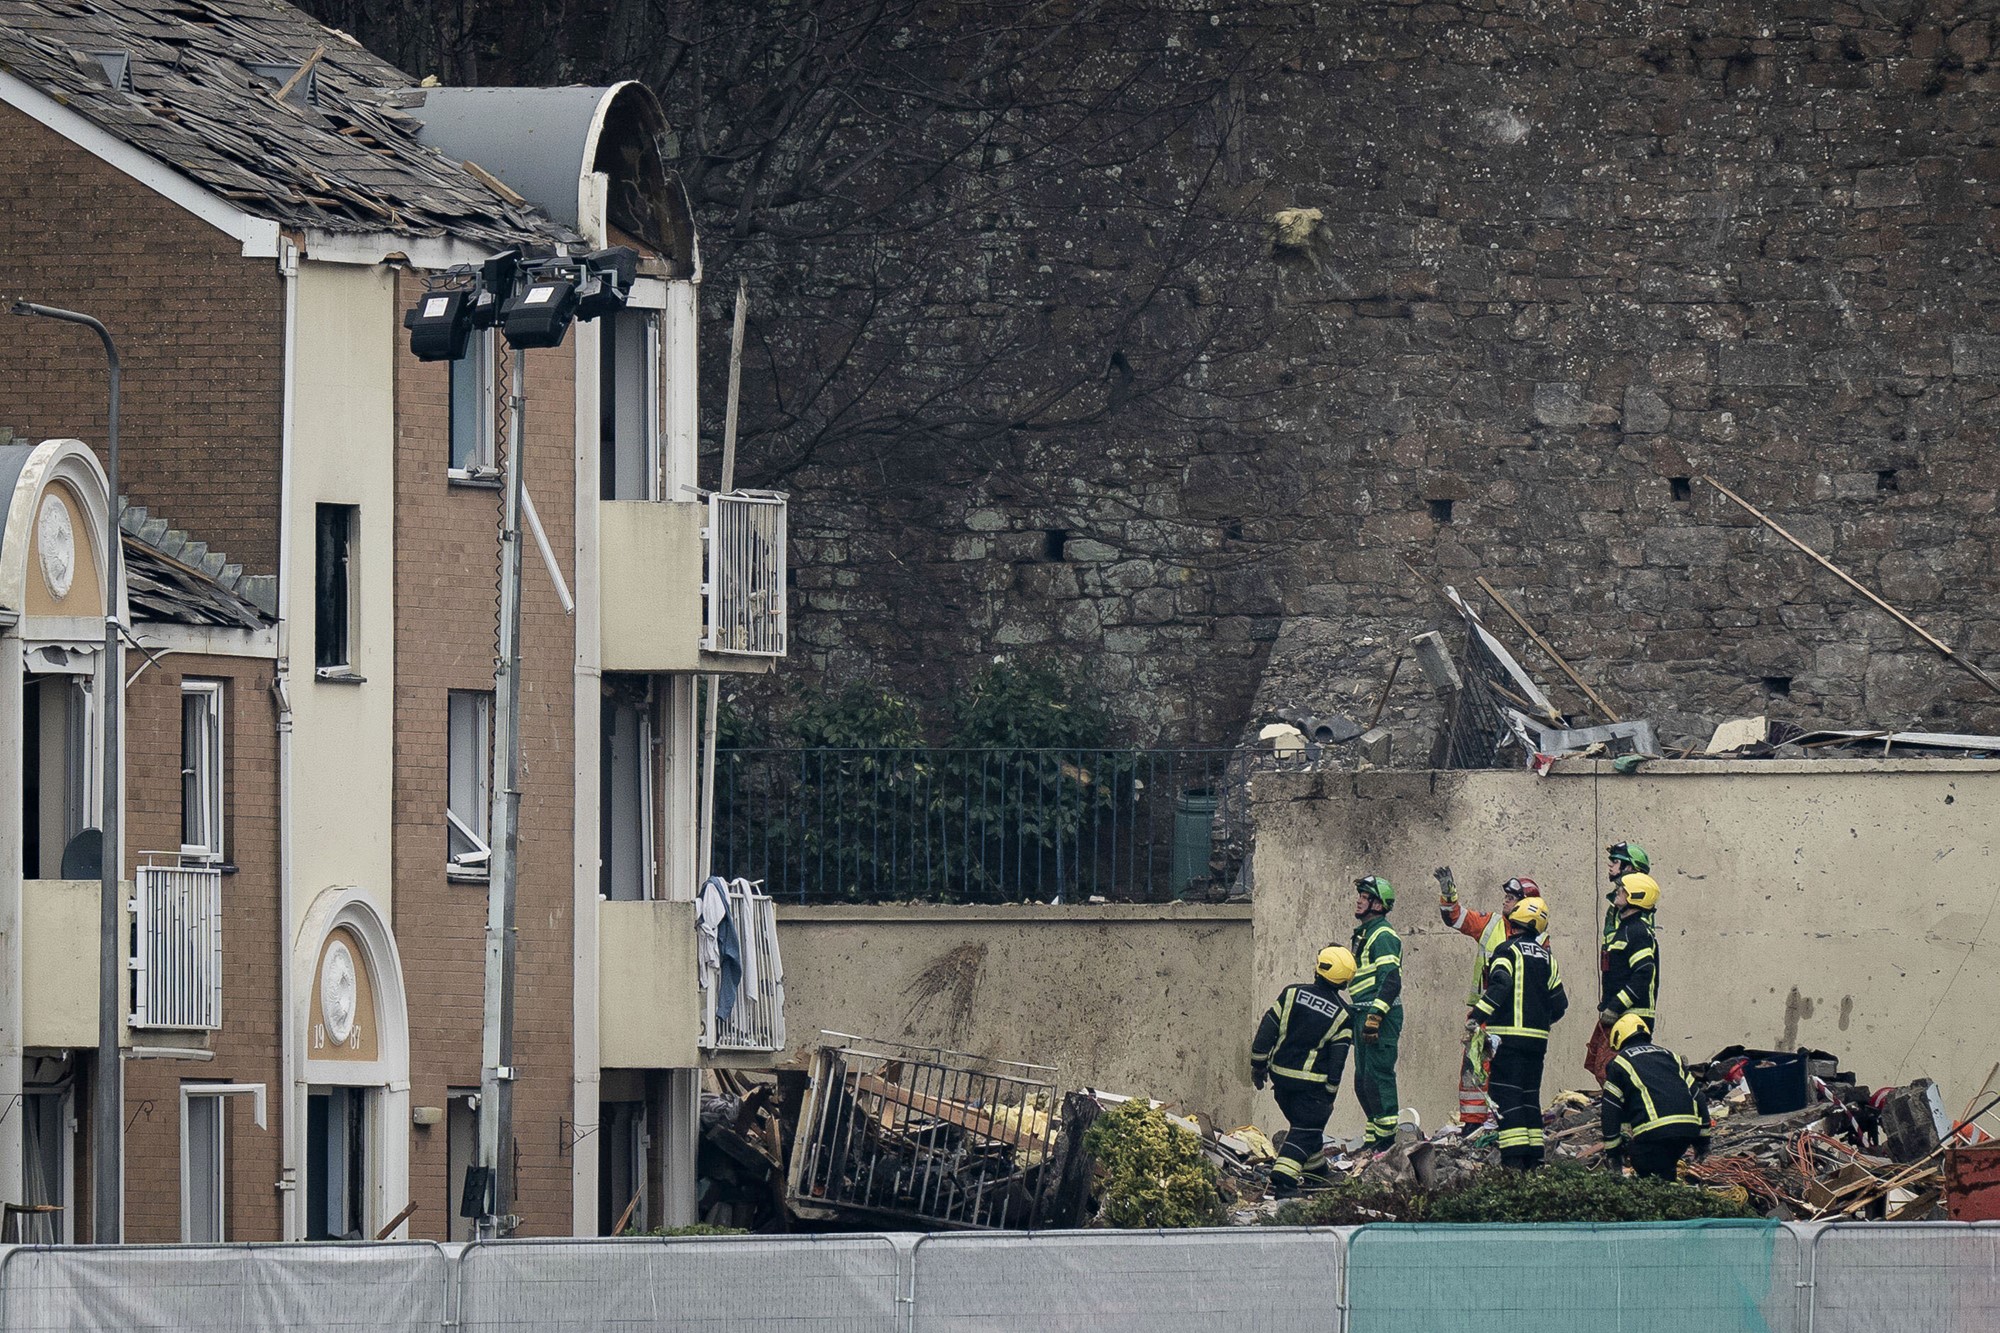 People in high vis emergency gear stand next to a damaged apartment building.